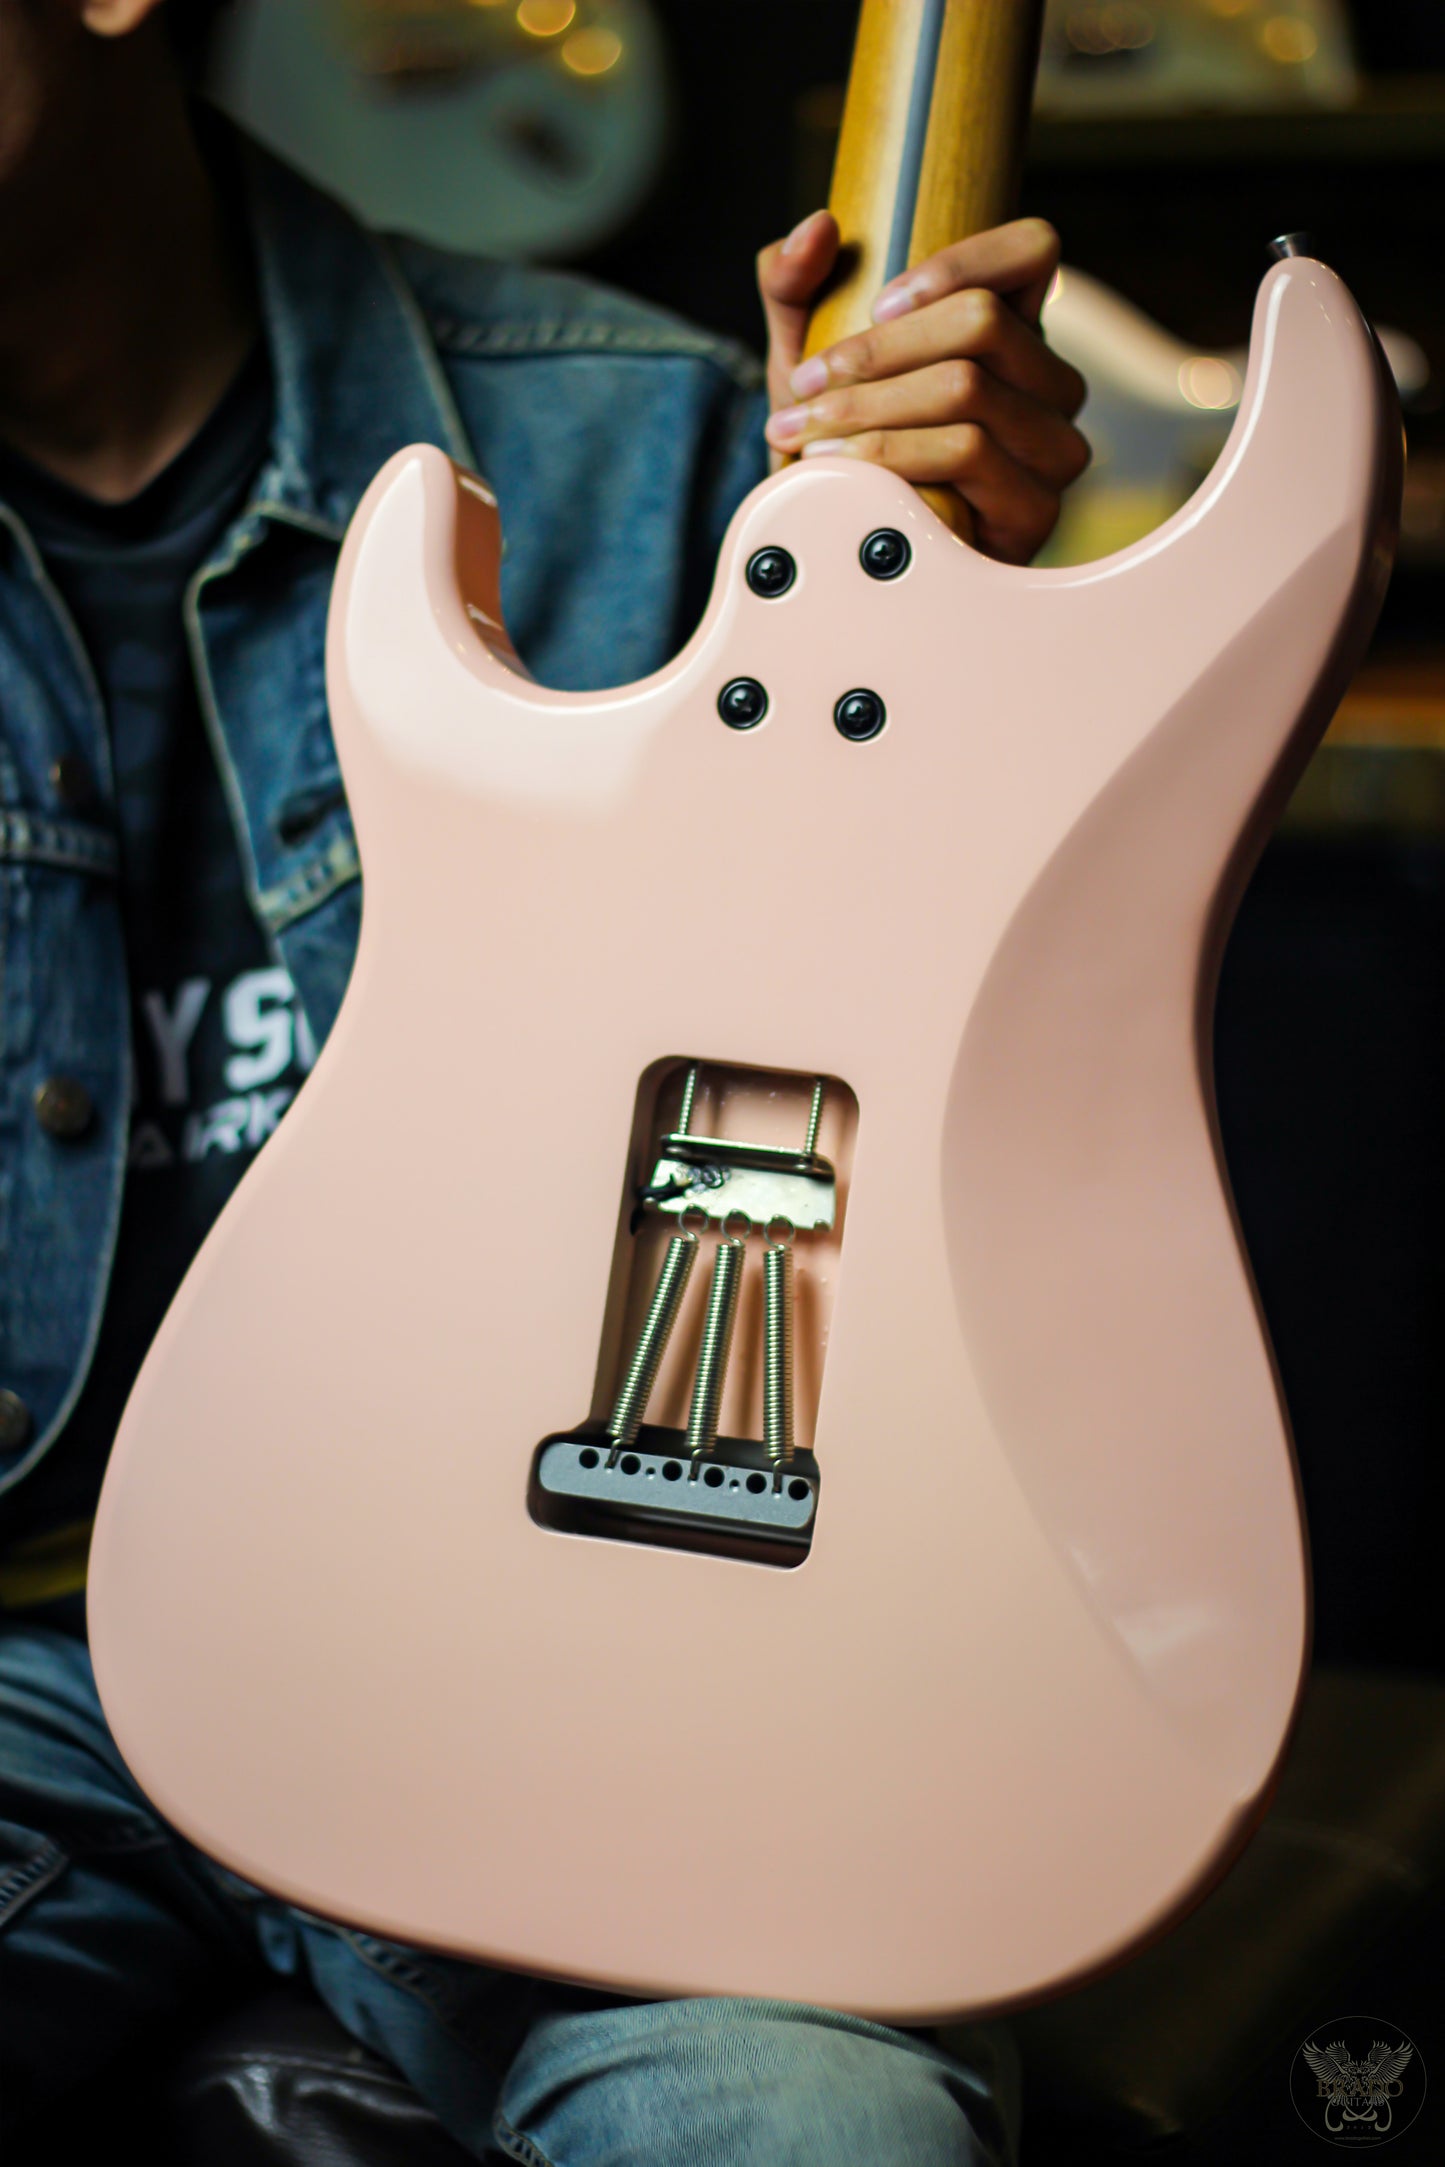 HILCS TONE BREAKER SHELL PINK PROTOTYPE HANDCRAFTED IN MALAYSIA (MINT)